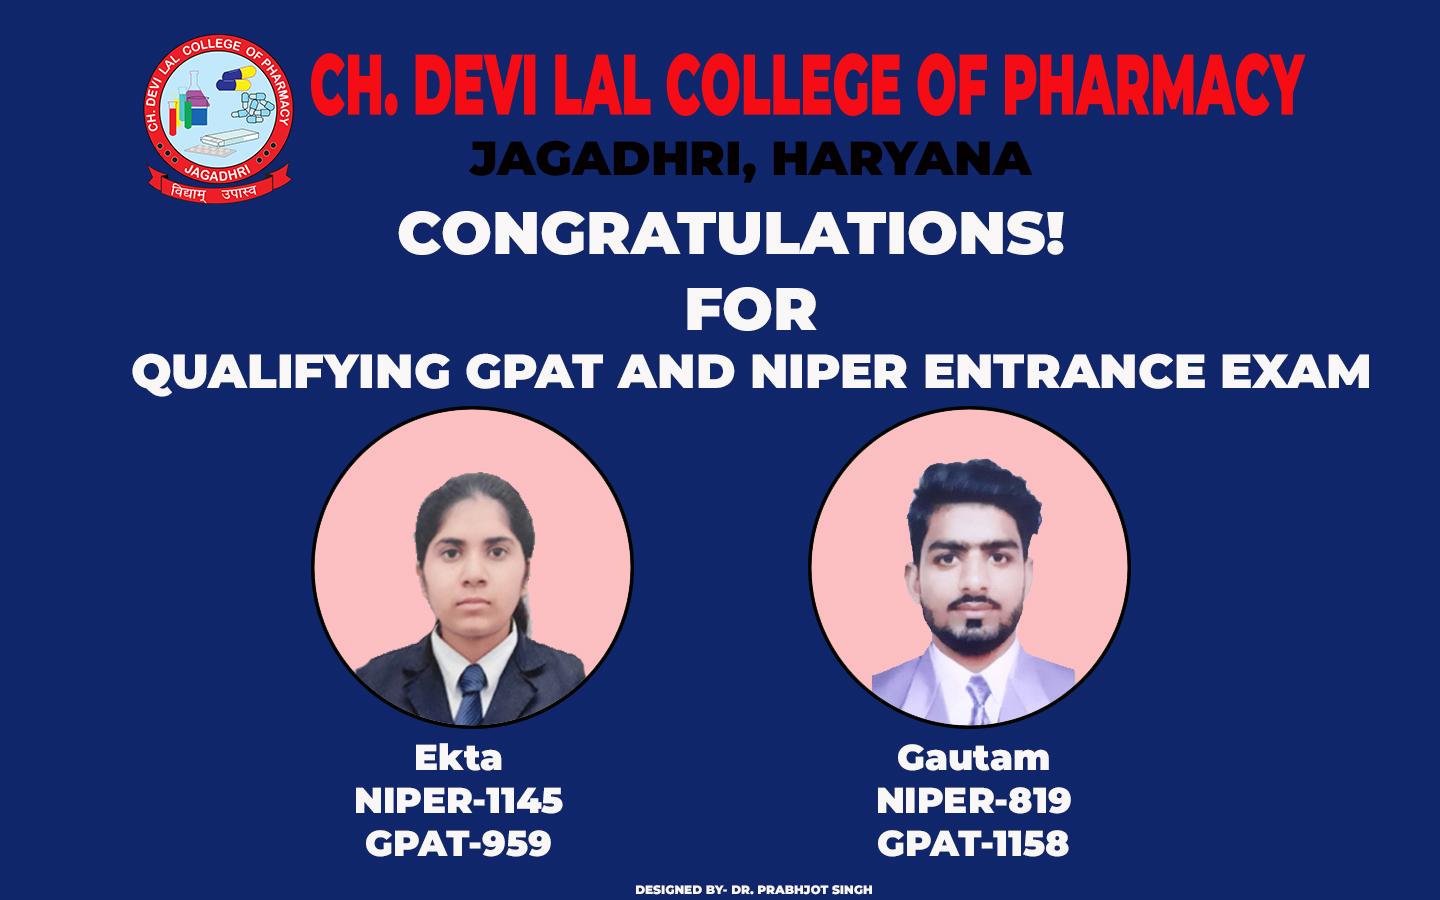 Students of CDL Qualified GPAT and NIPER Entrance exam